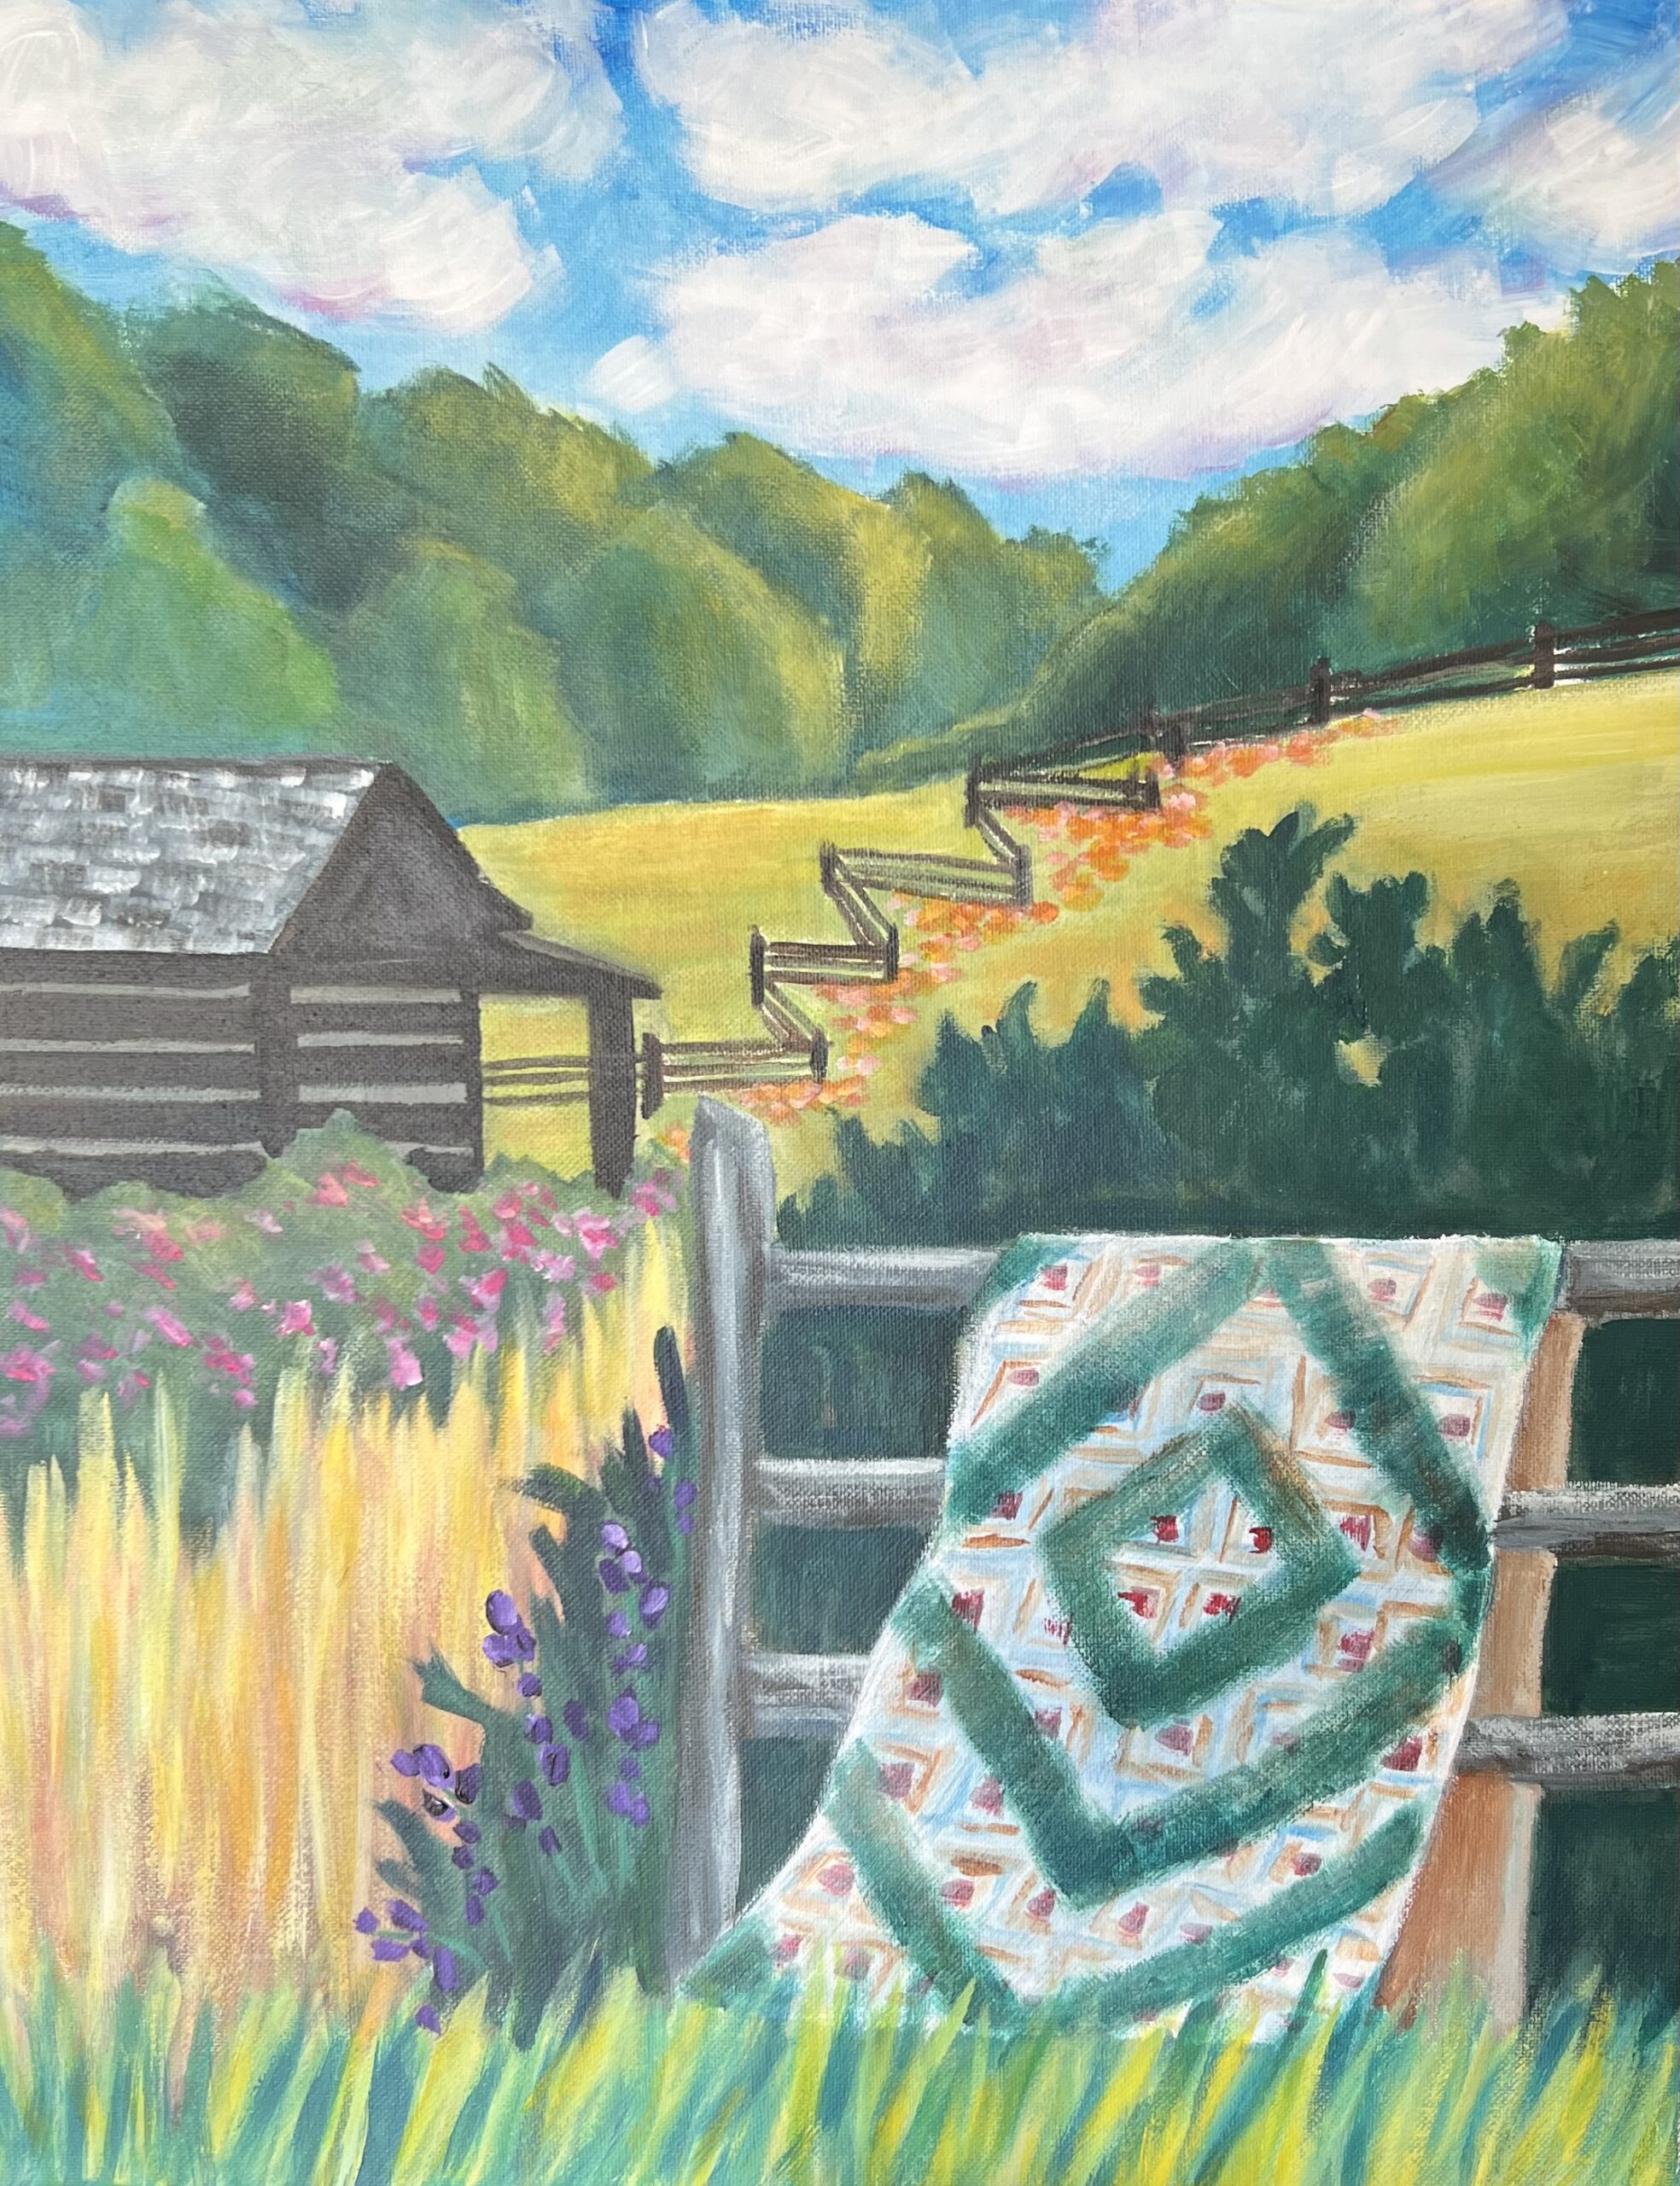 Painting of a quilt draped over a wooden fence in a field.